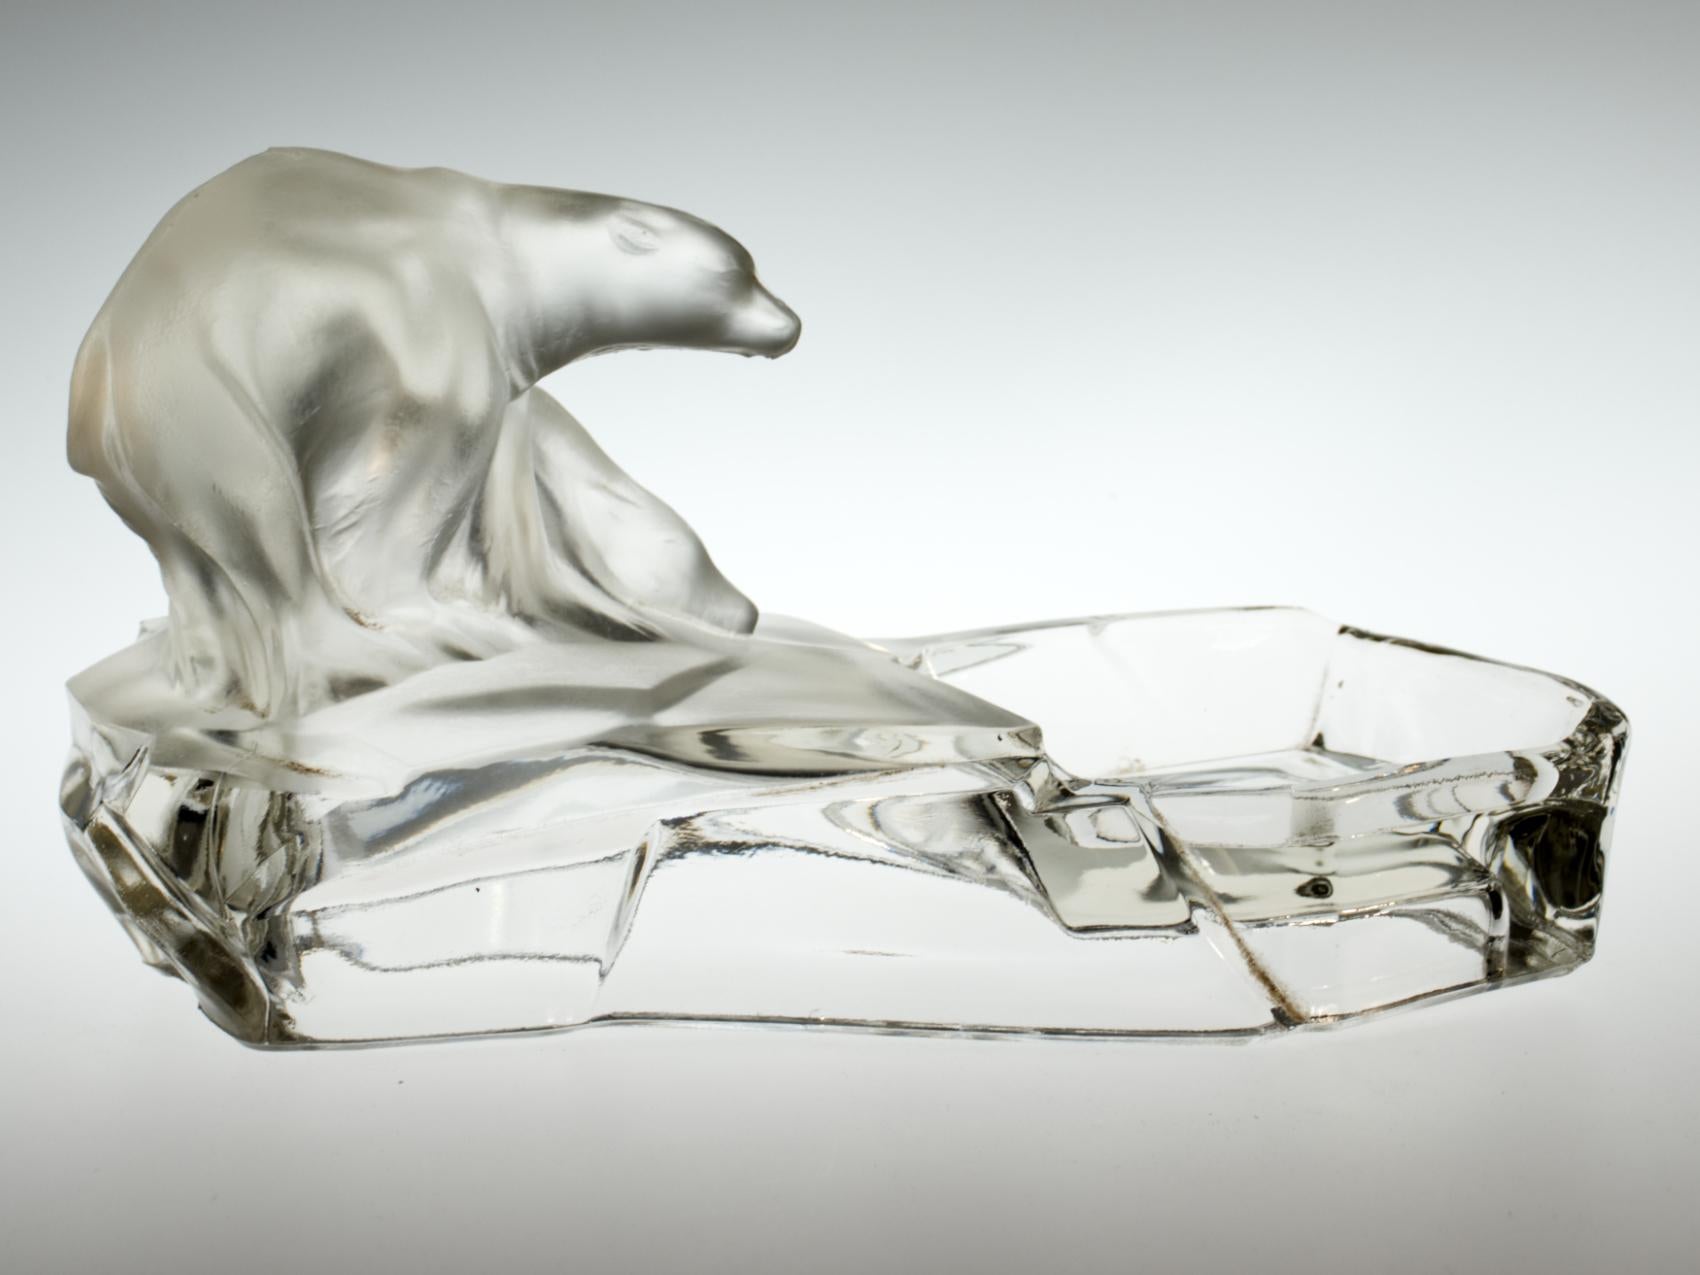 Made by Feigl and Morawetz Libochovice and designed by the Czech sculptor Karel Zentner. An antique figurative ashtray made out of clear pressed glass, partially frosted. Figurative scheme showing two polar bears sitting on an iceberg.
Measures: 24